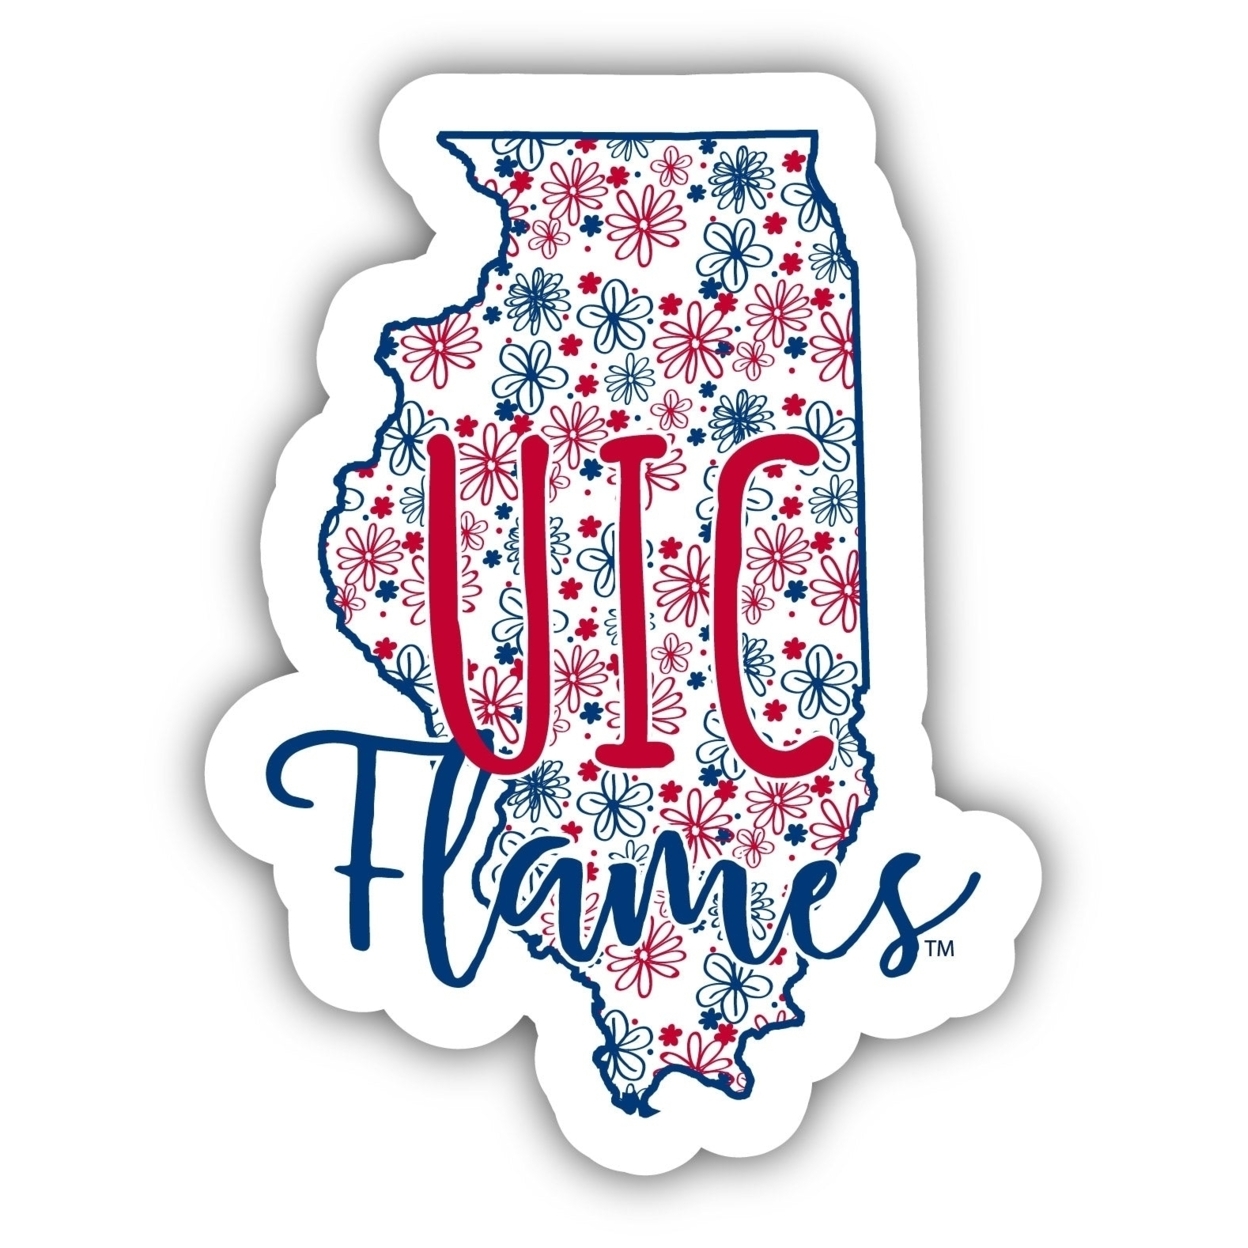 University Of Illinois At Chicago Floral State Die Cut Decal 2-Inch